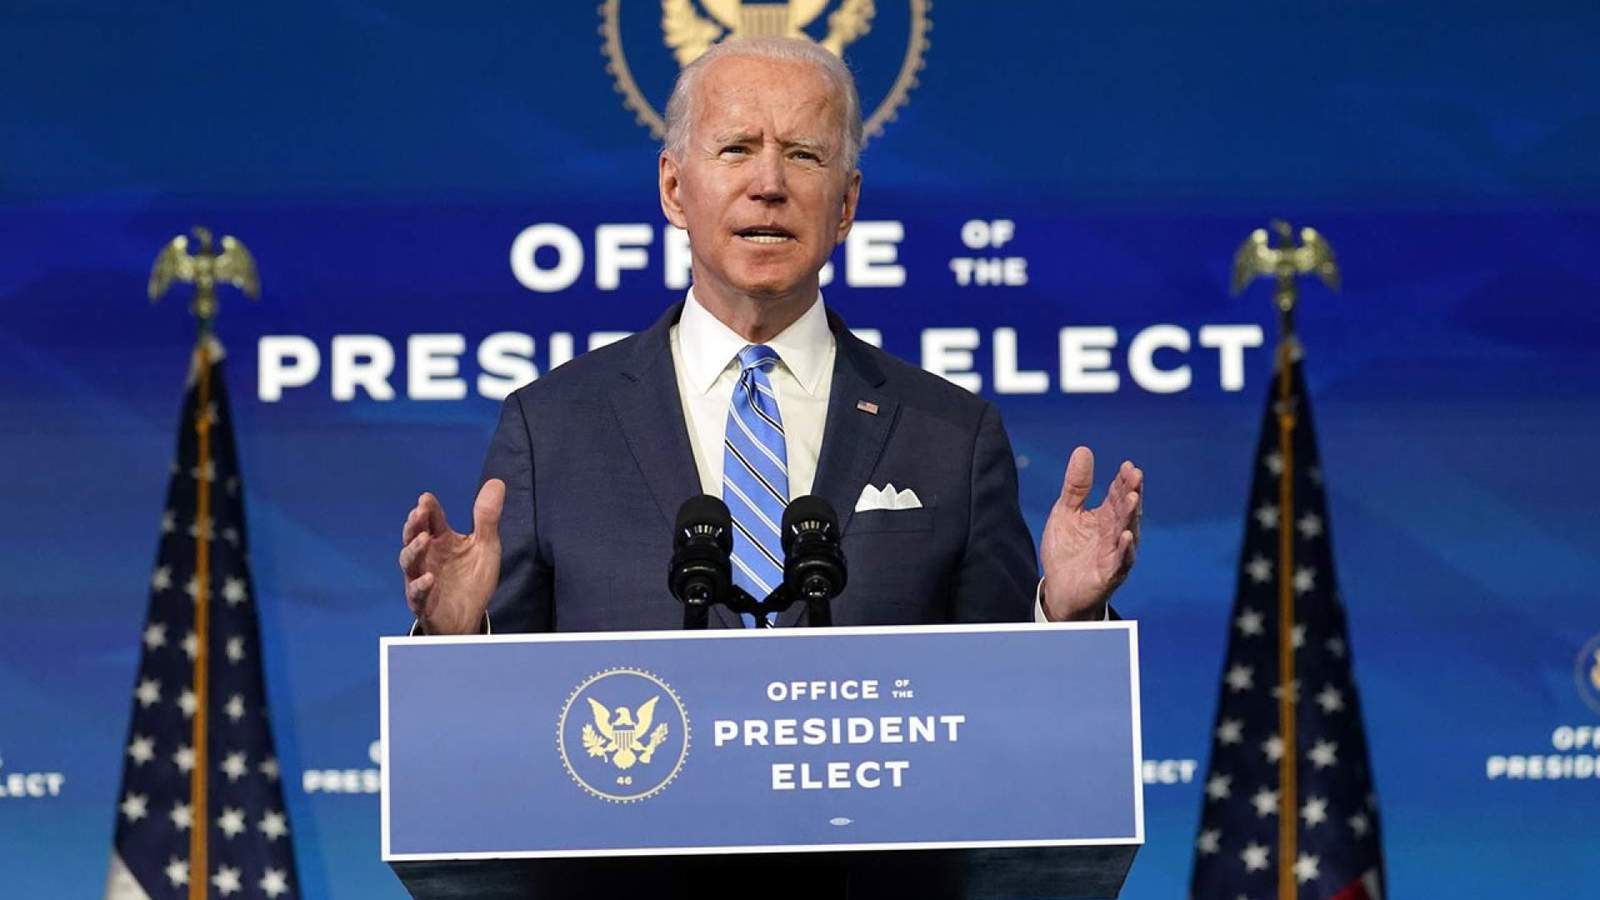 Vaccines to stimulus checks: Here’s what’s in Biden plan